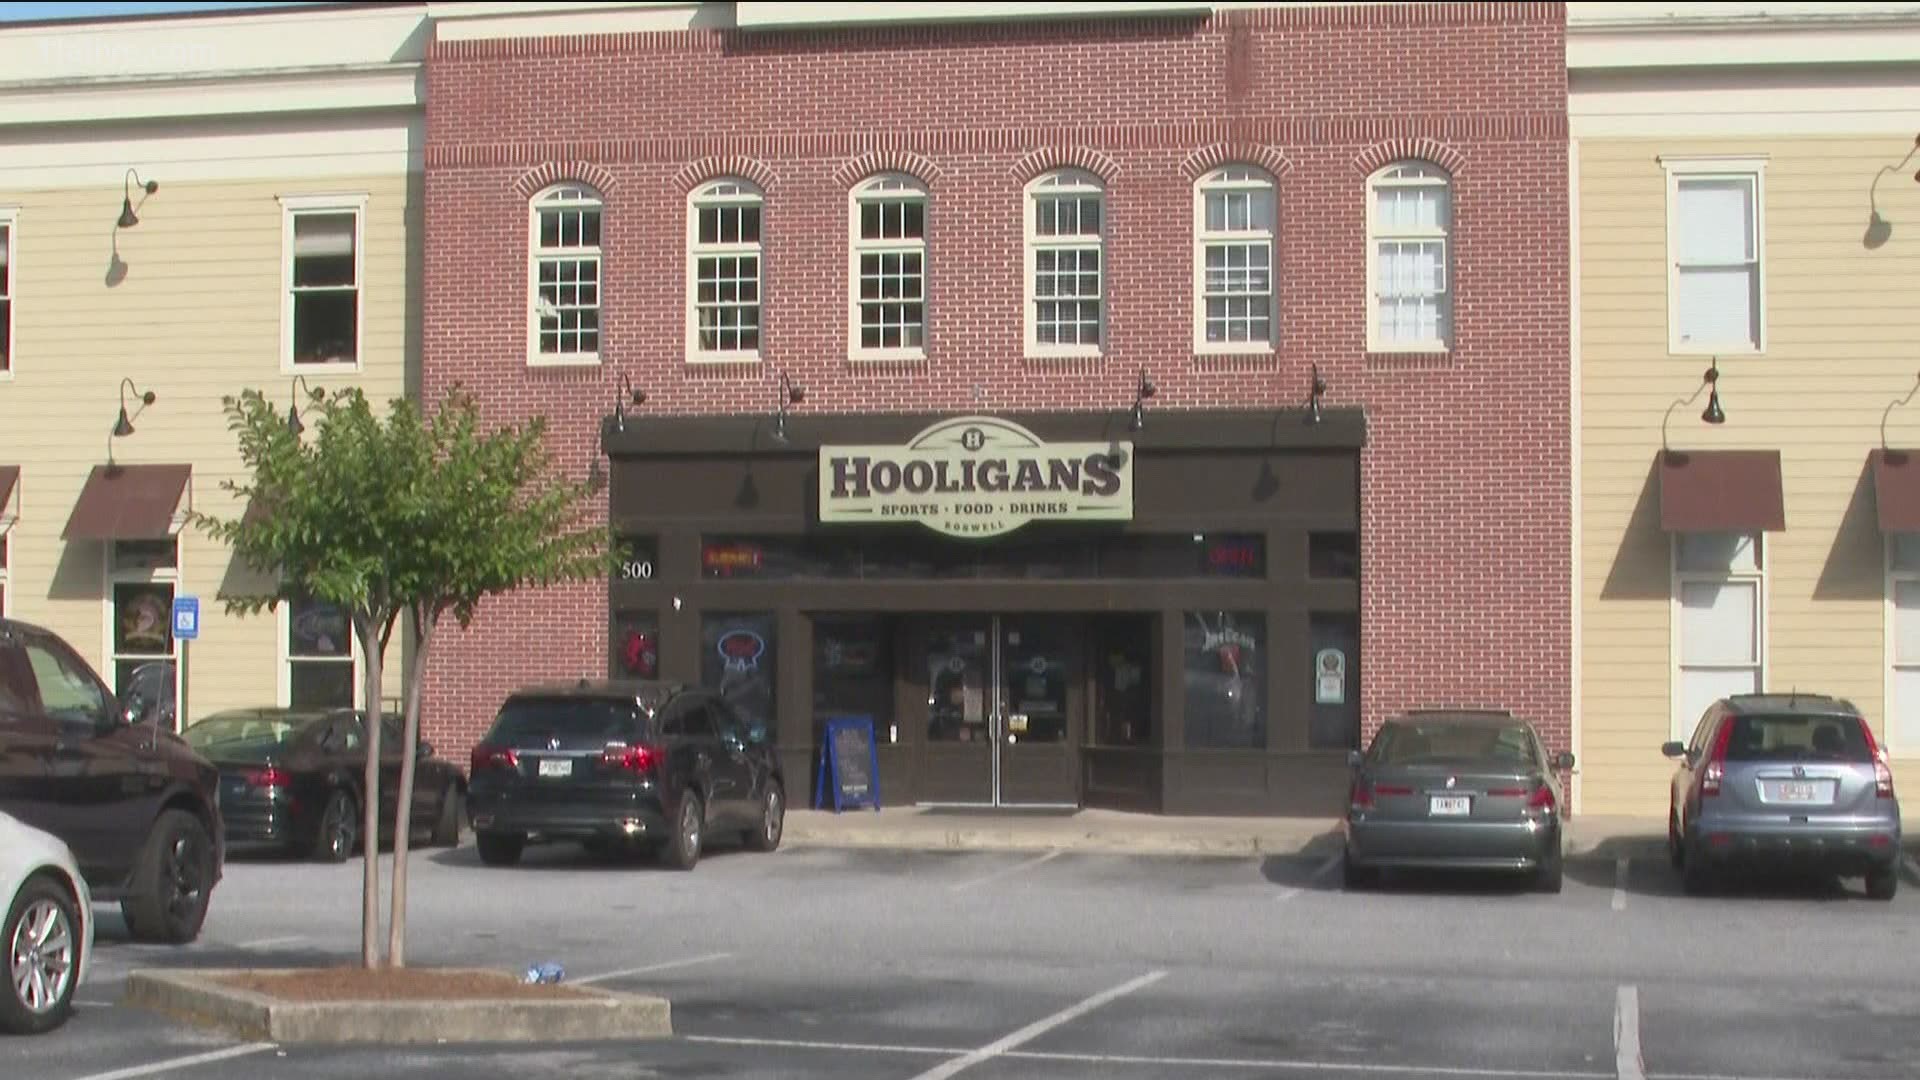 Roswell Police said they responded to a shooting call at Hooligans Tavern, on Holcomb Bridge Rd., and discovered a man with "multiple gunshot wounds."